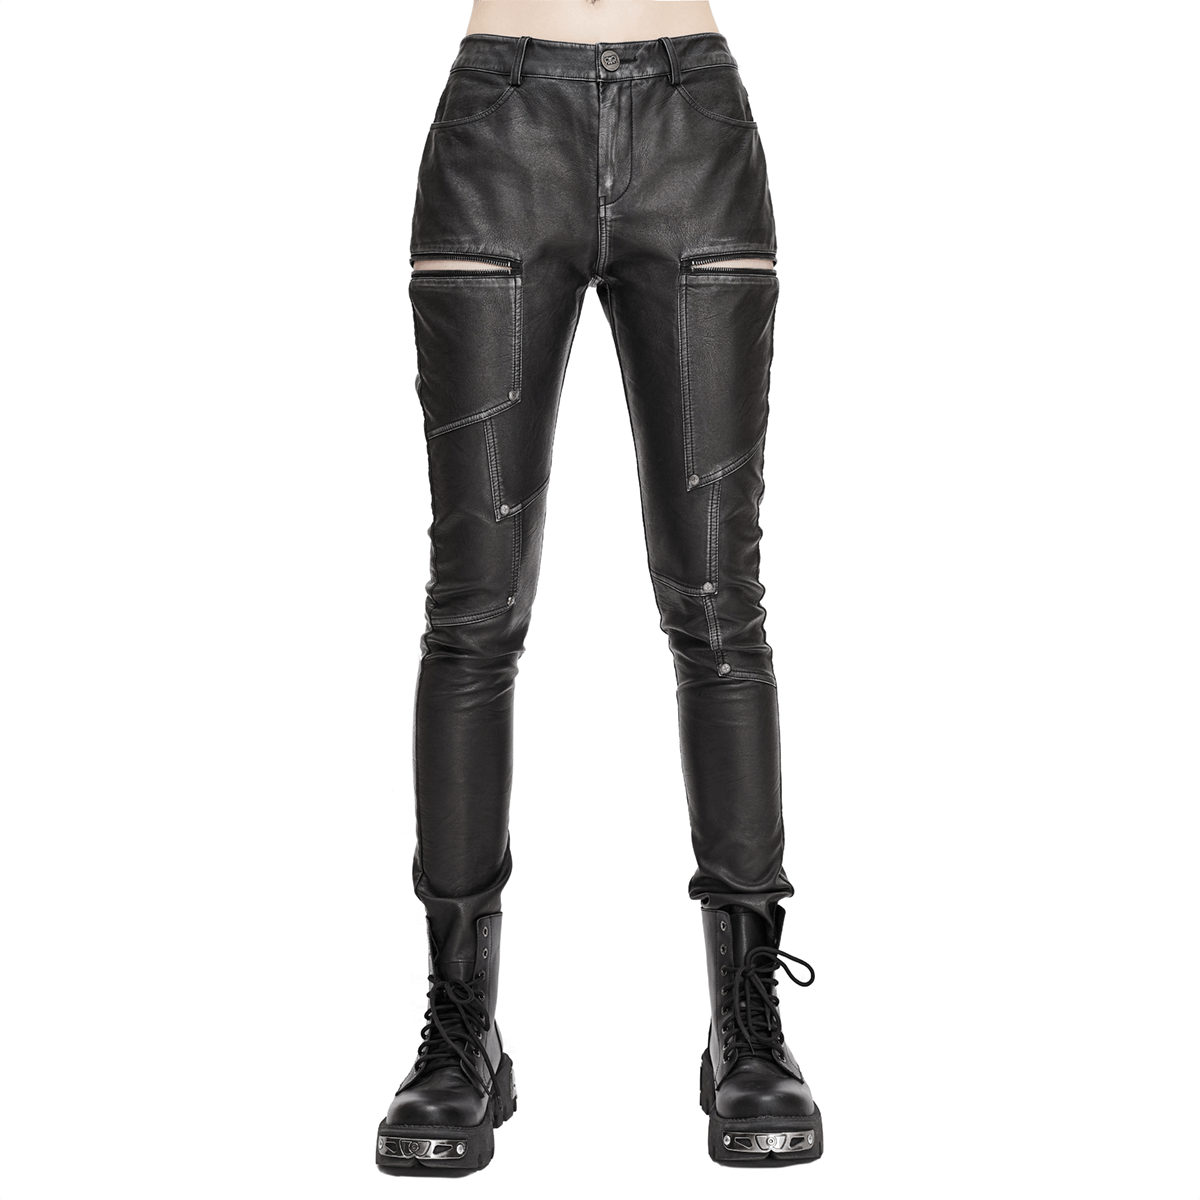 Pu Leather Pants for Women Sexy Tight Stretchy High Waist Button Leggings  Solid Color Gothic Slim Fitted Pants Trousers Womens Clothes